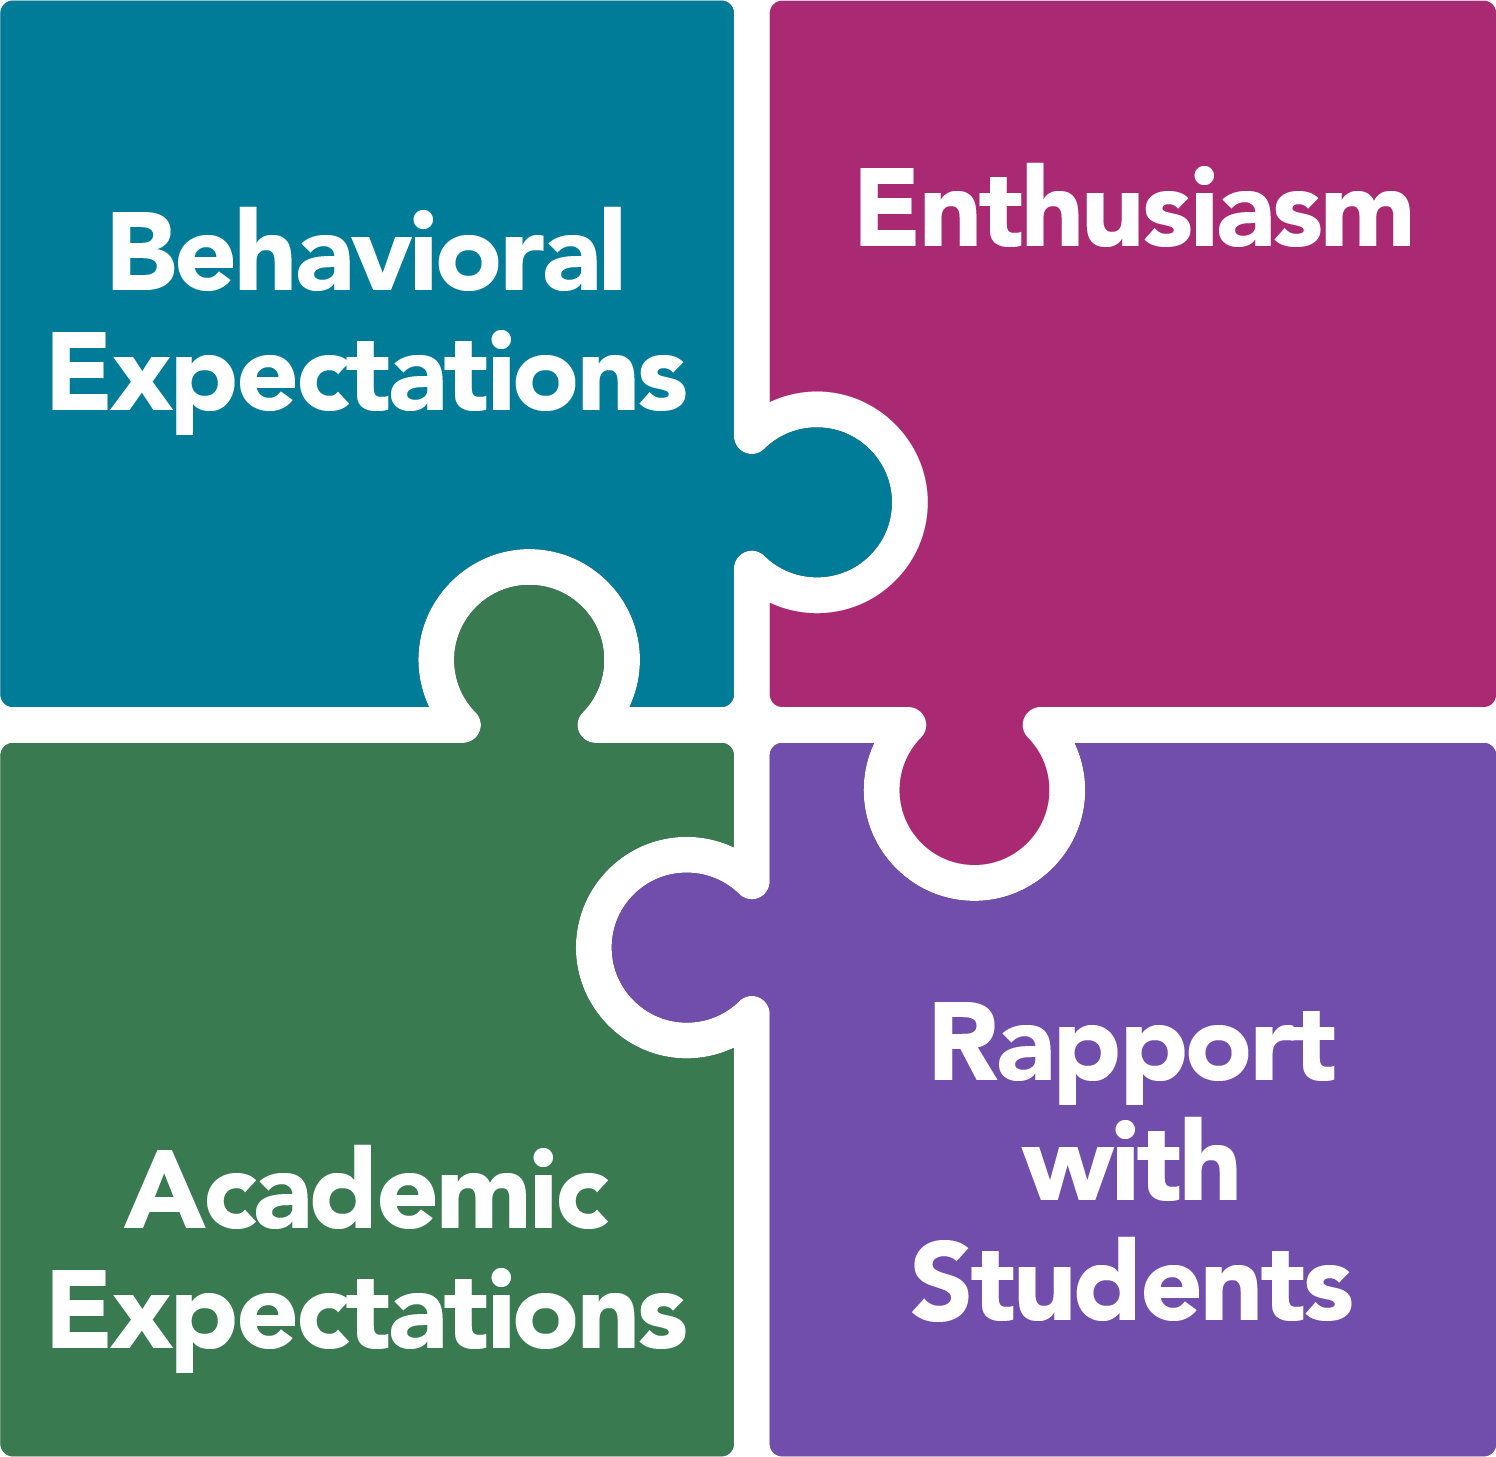 First Day of School Four Piece Puzzle Layout. Puzzle pieces read 'Behavioral Expectations', 'Enthusiasm', 'Academic Expectations', 'Rapport with Students'